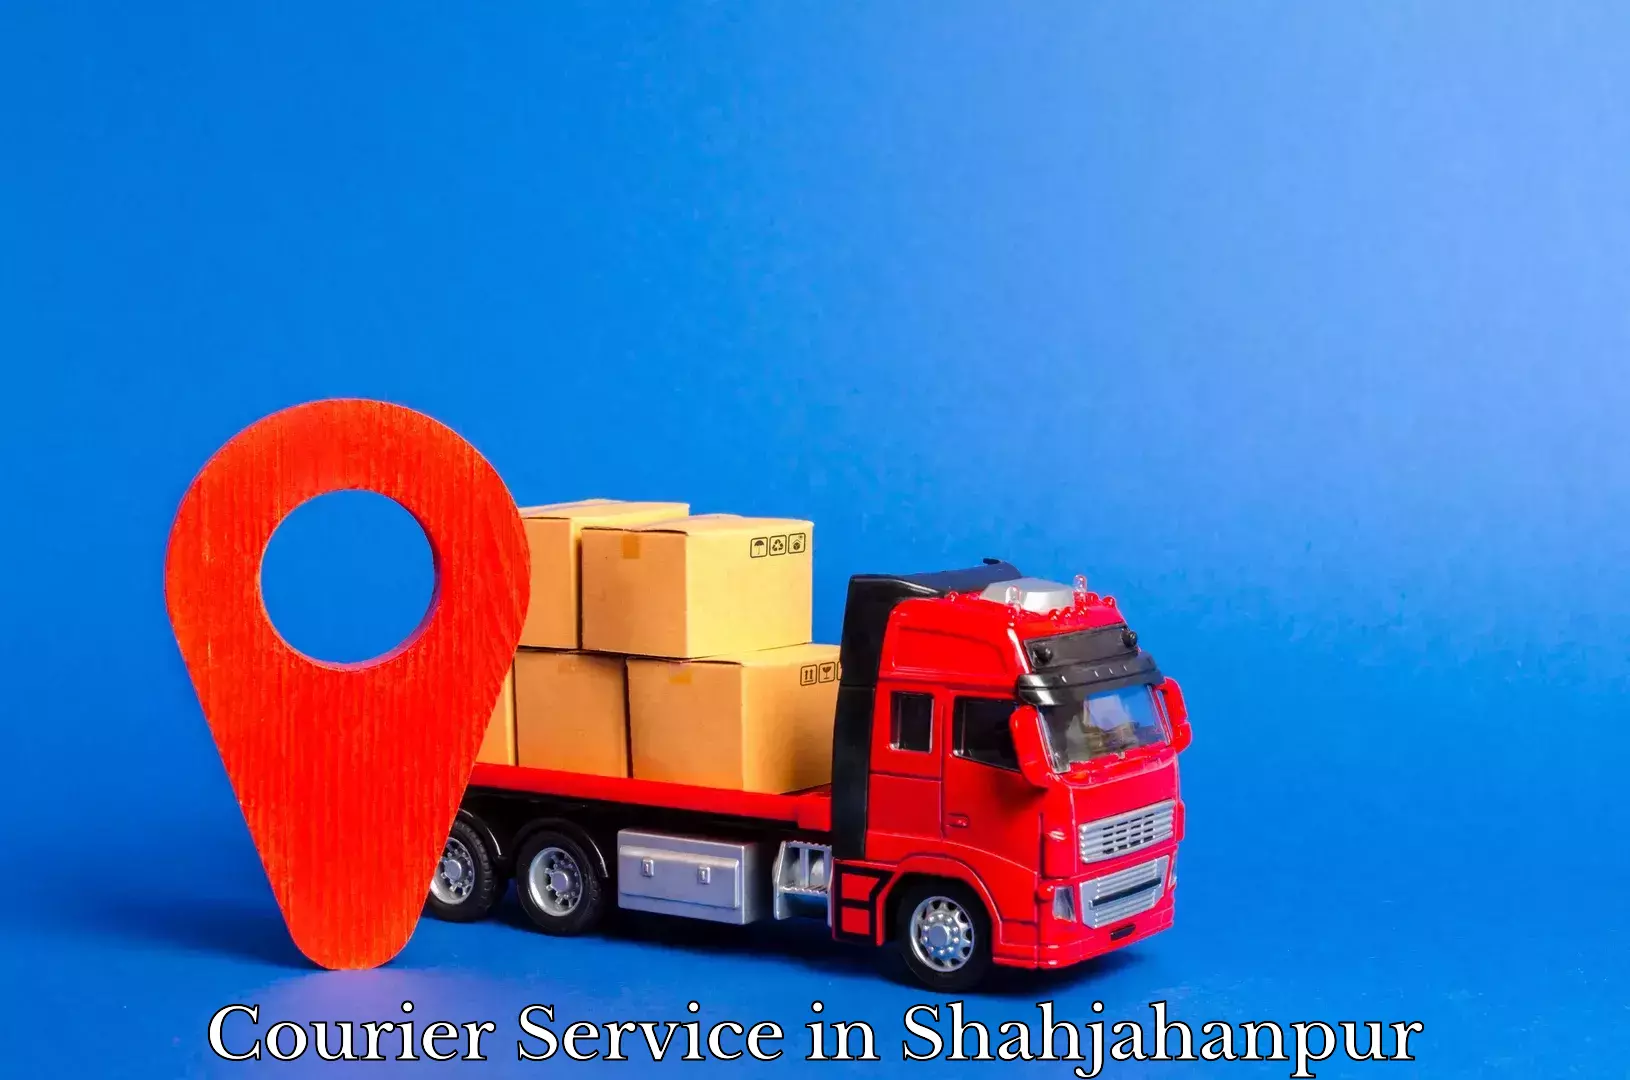 Nationwide courier service in Shahjahanpur